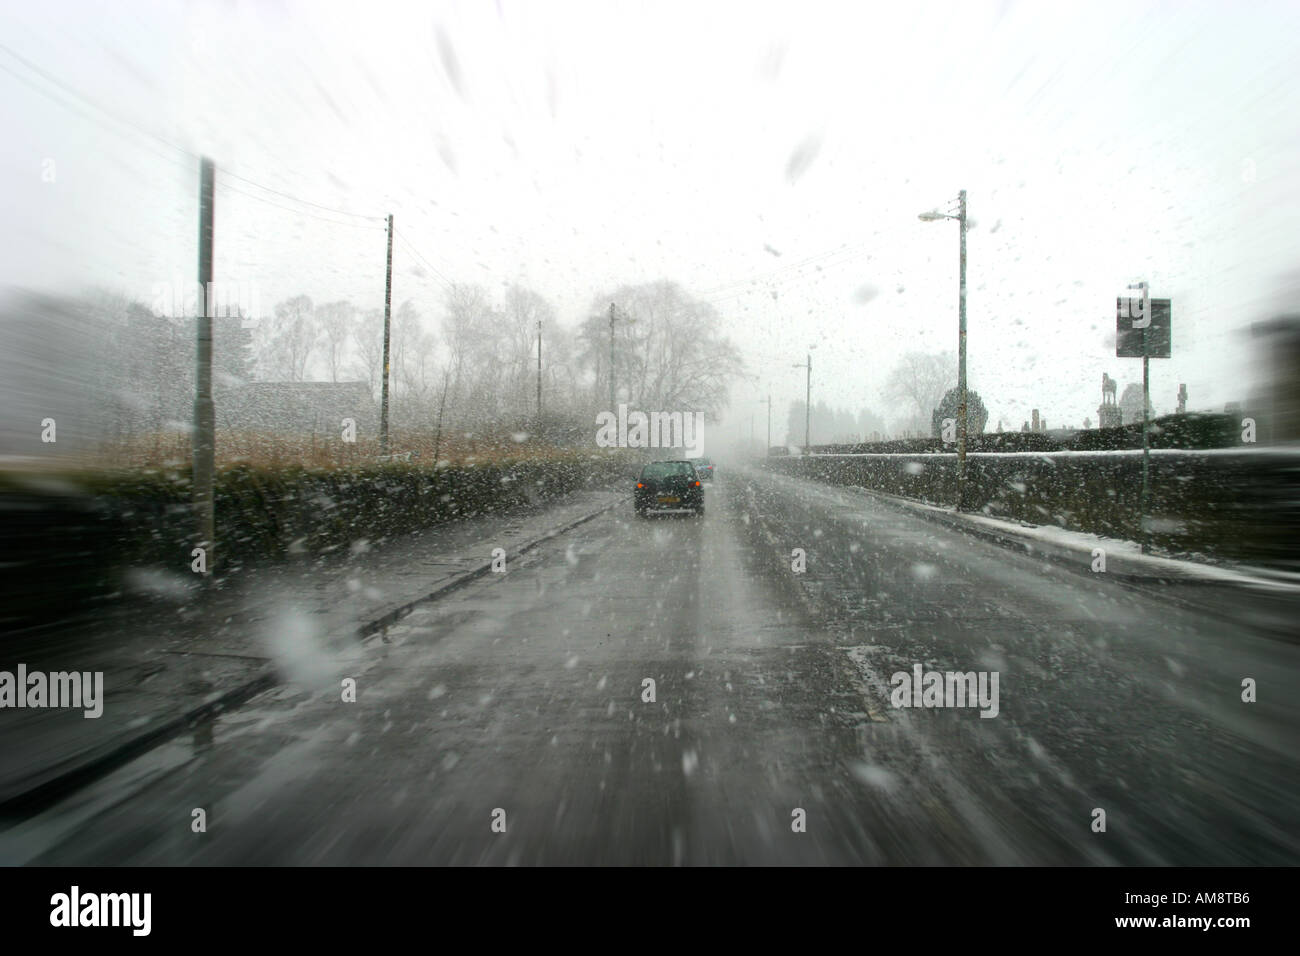 Urban road from in car with driving sleet and snow Stock Photo